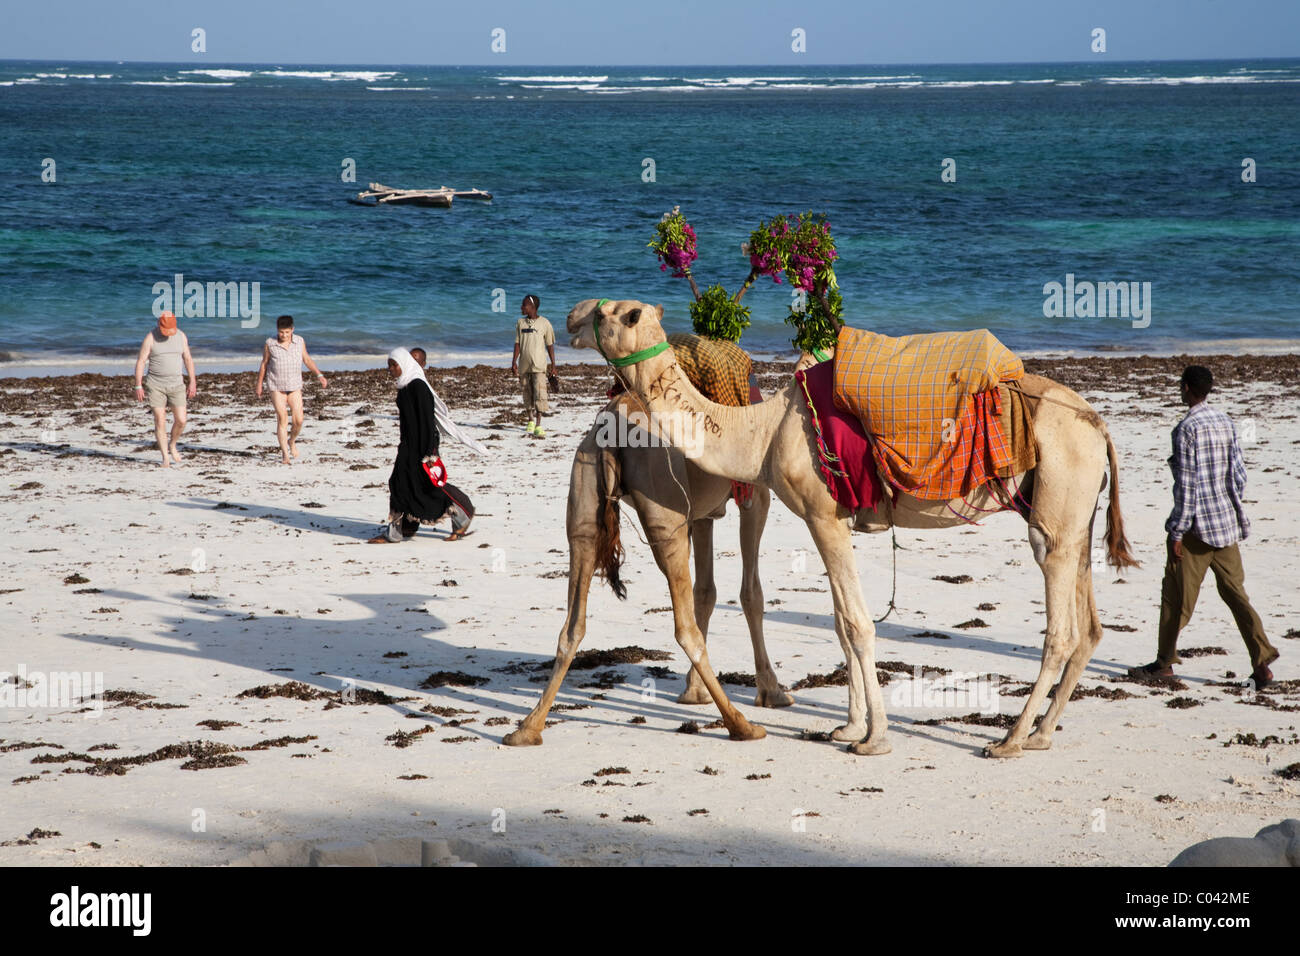 Man with his camels is waiting for tourists to take a ride along the beach, Kenya, Africa Stock Photo